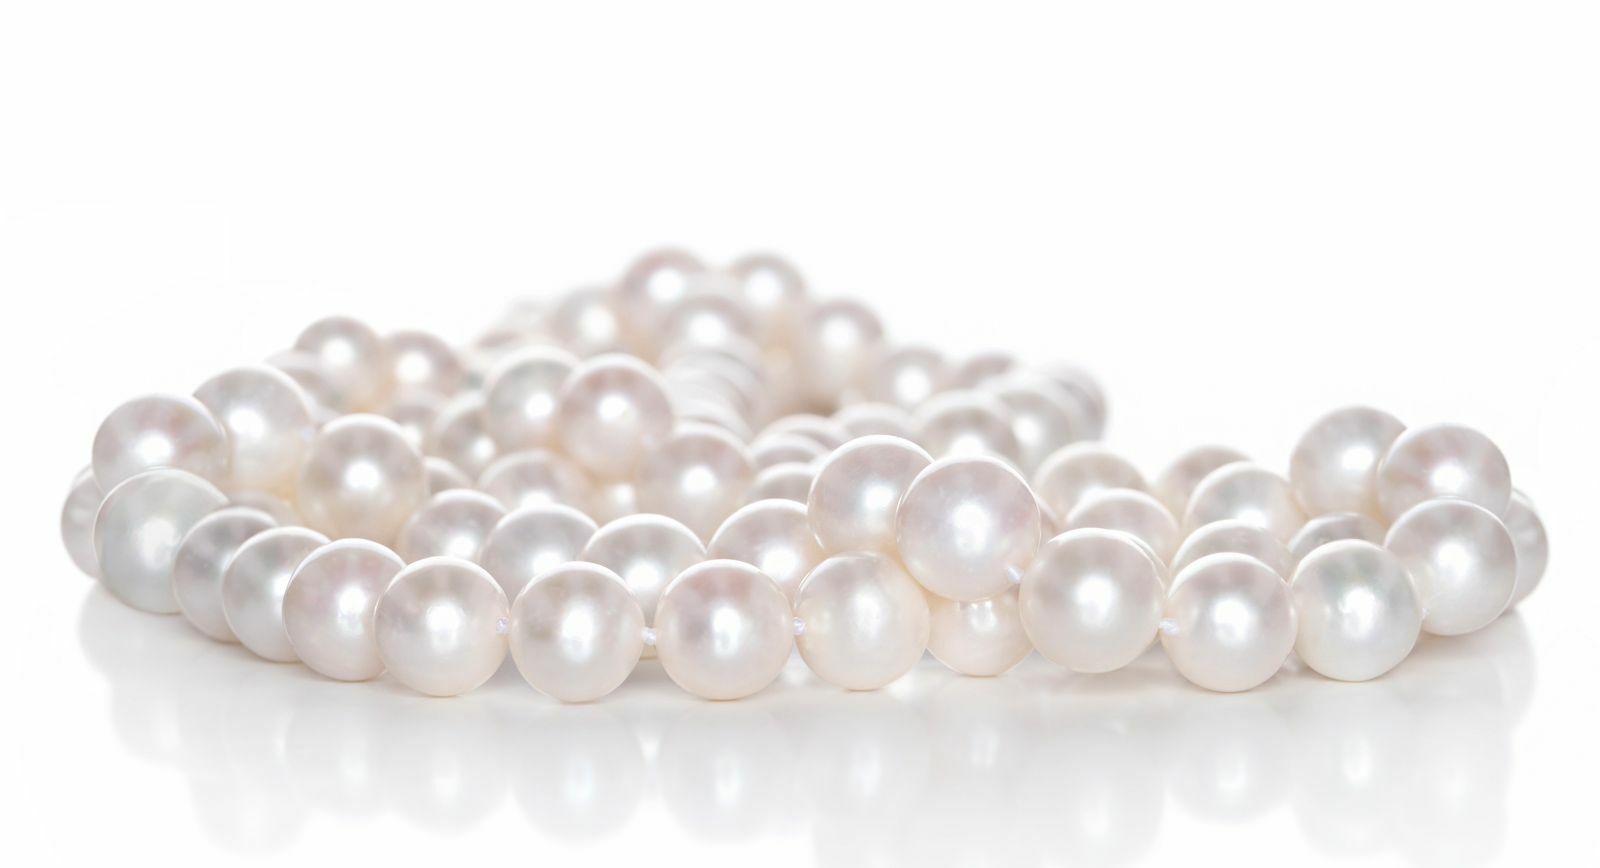 10 Golden Rules Of Looking After Pearl Jewellery